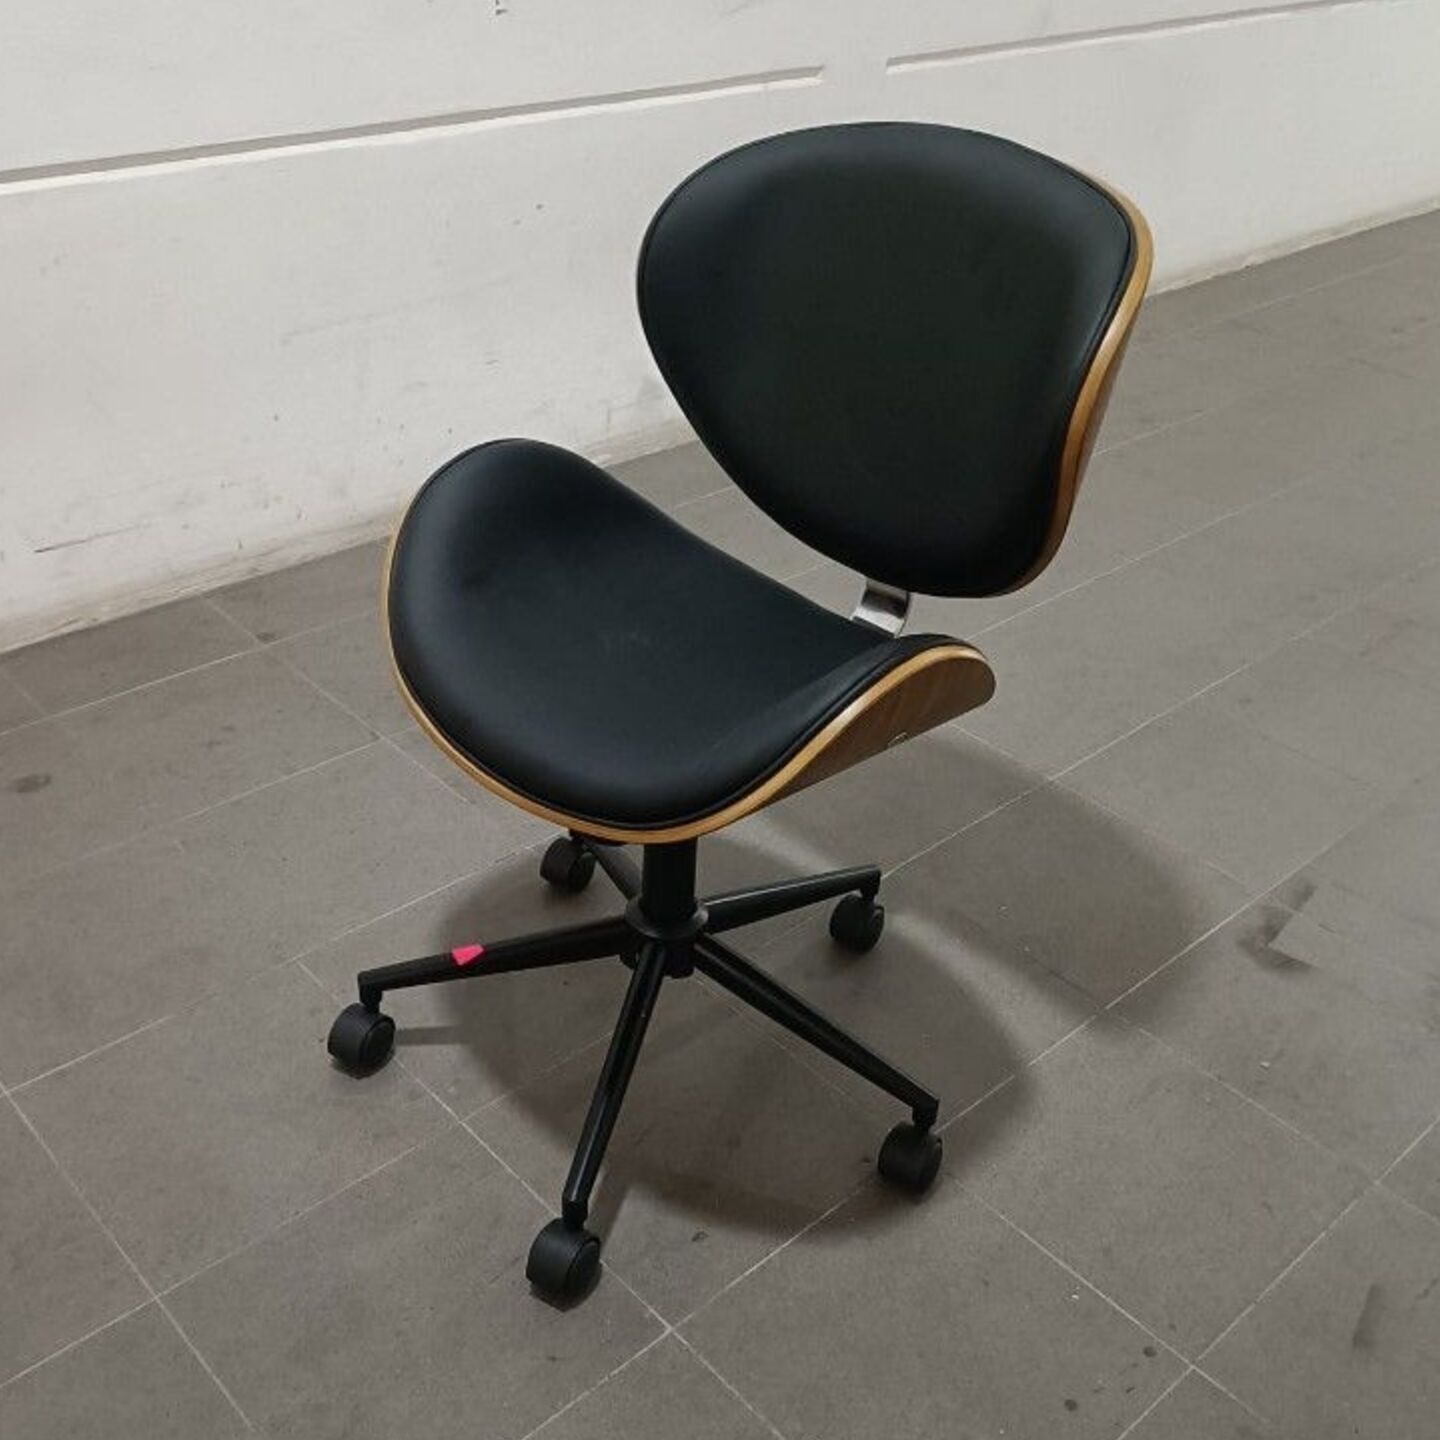 STEWAET Office Chair in BLACK PVC with Black Base